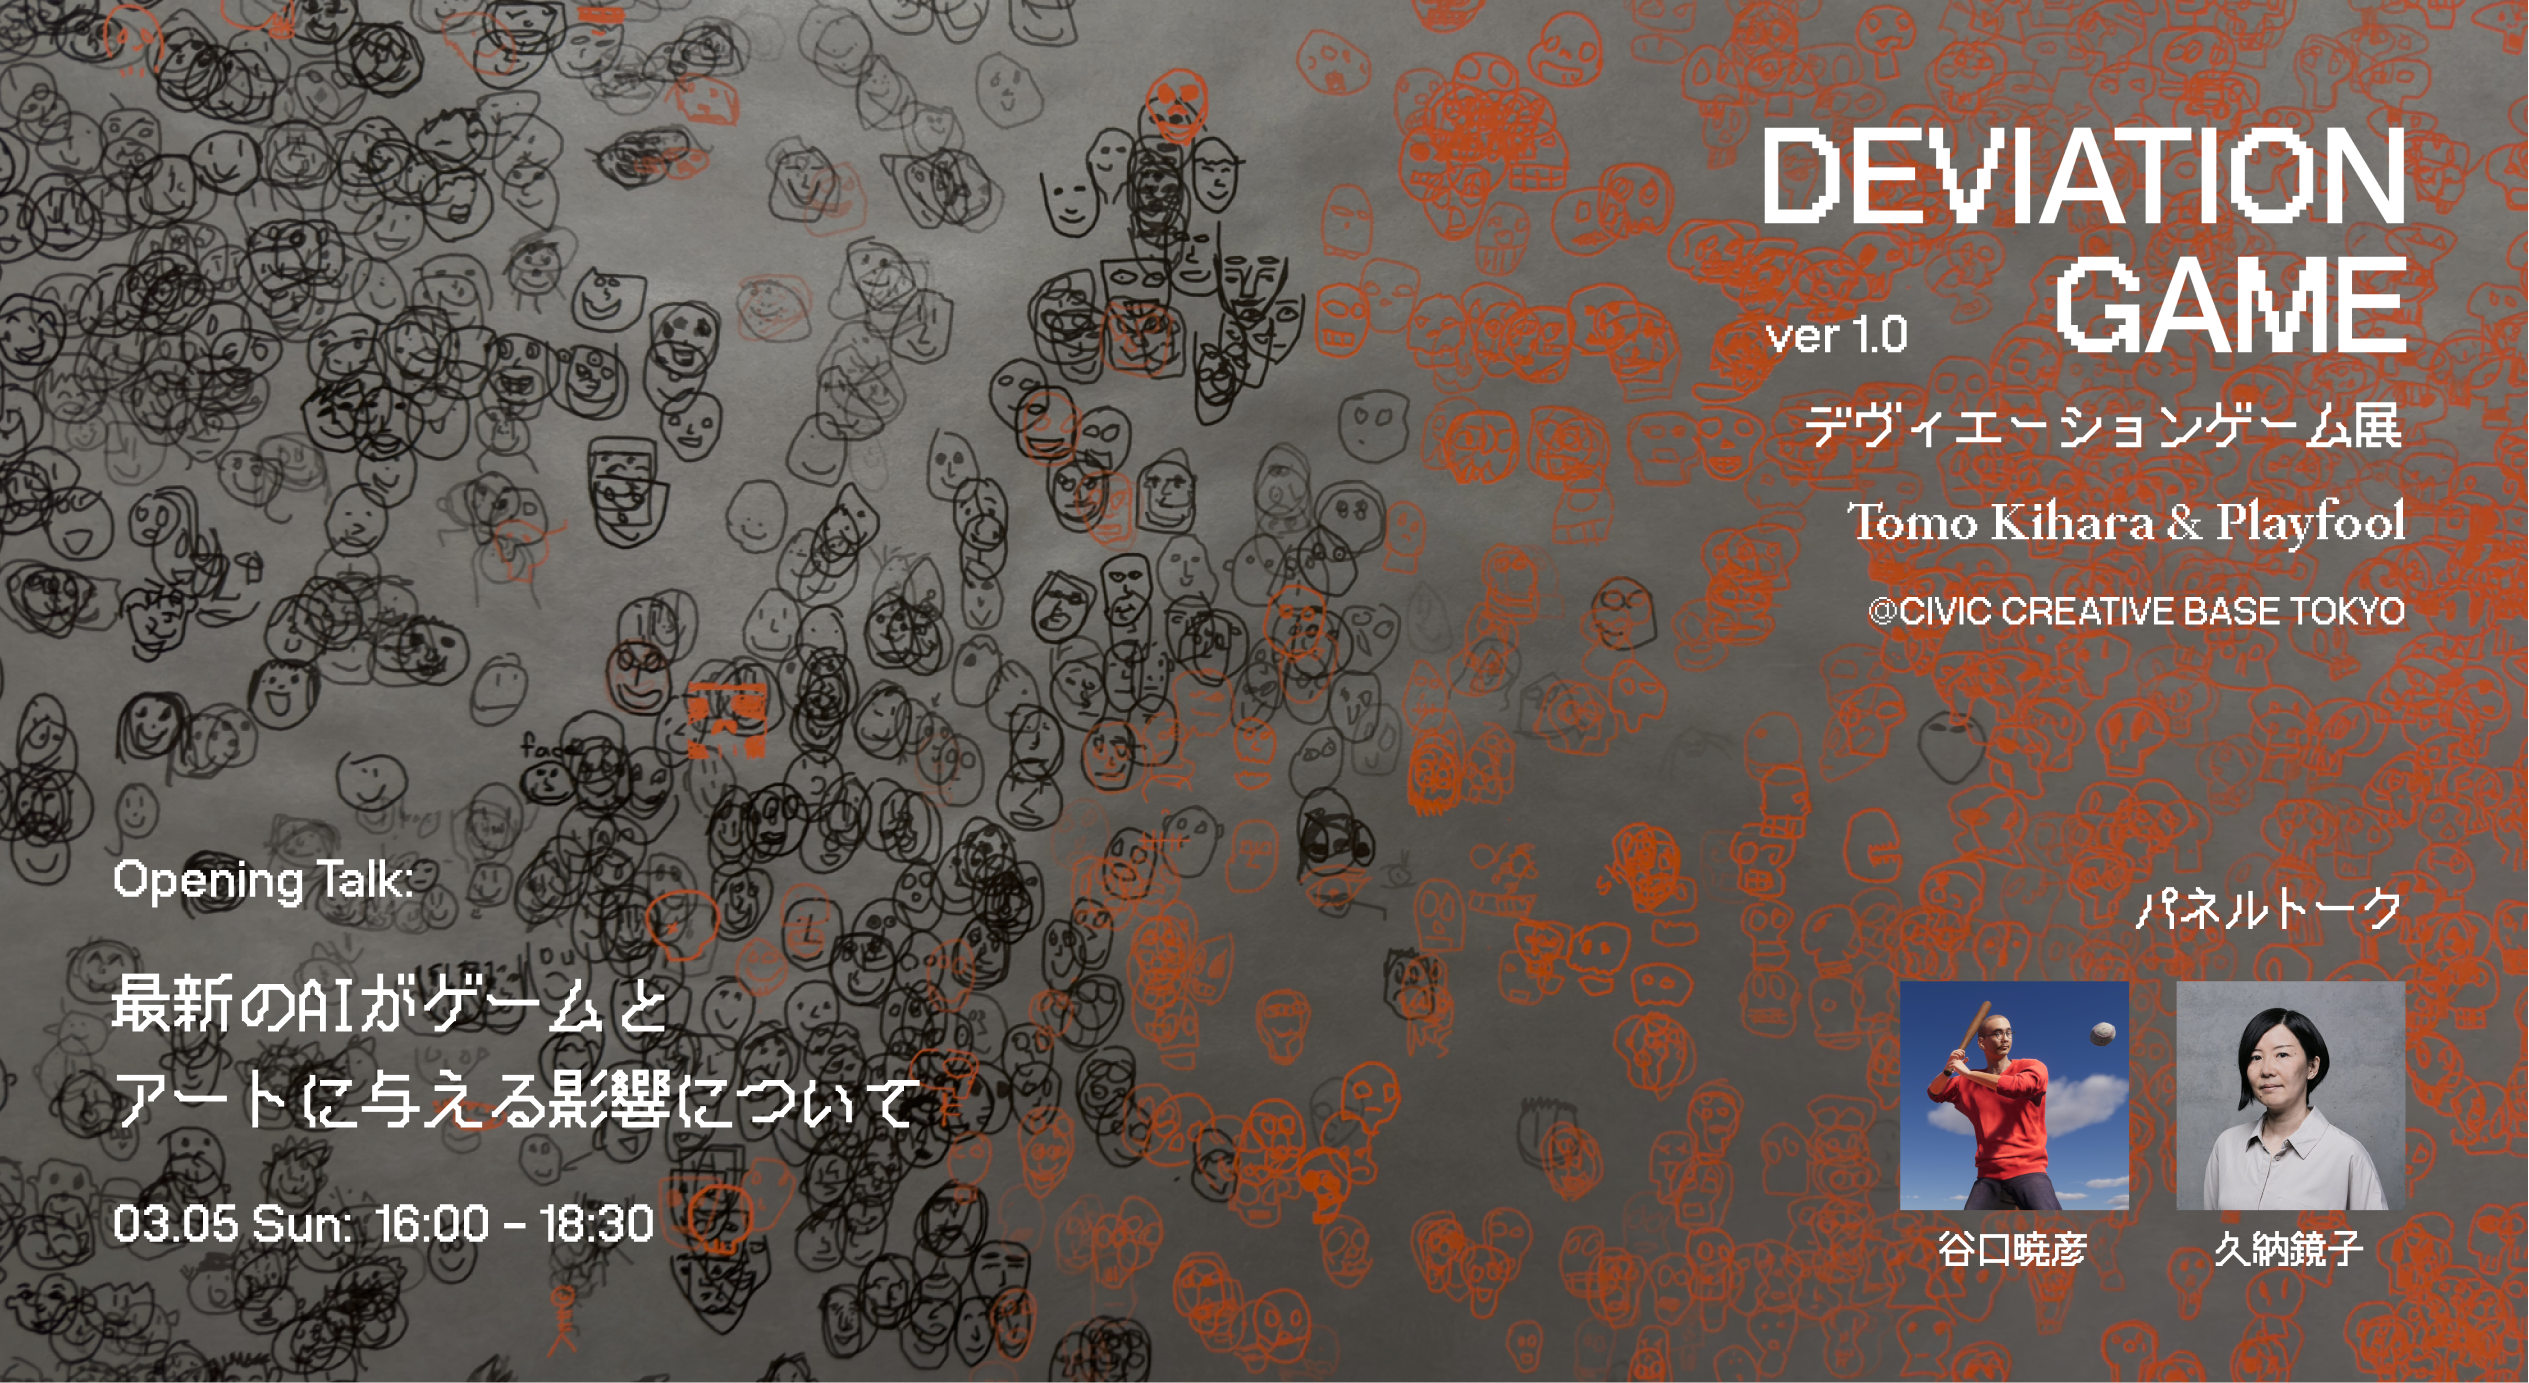 The Impact of the latest AI on Games and Art (CCBT Meetup 011 “Deviation Game ver1.0” Opening Talk)